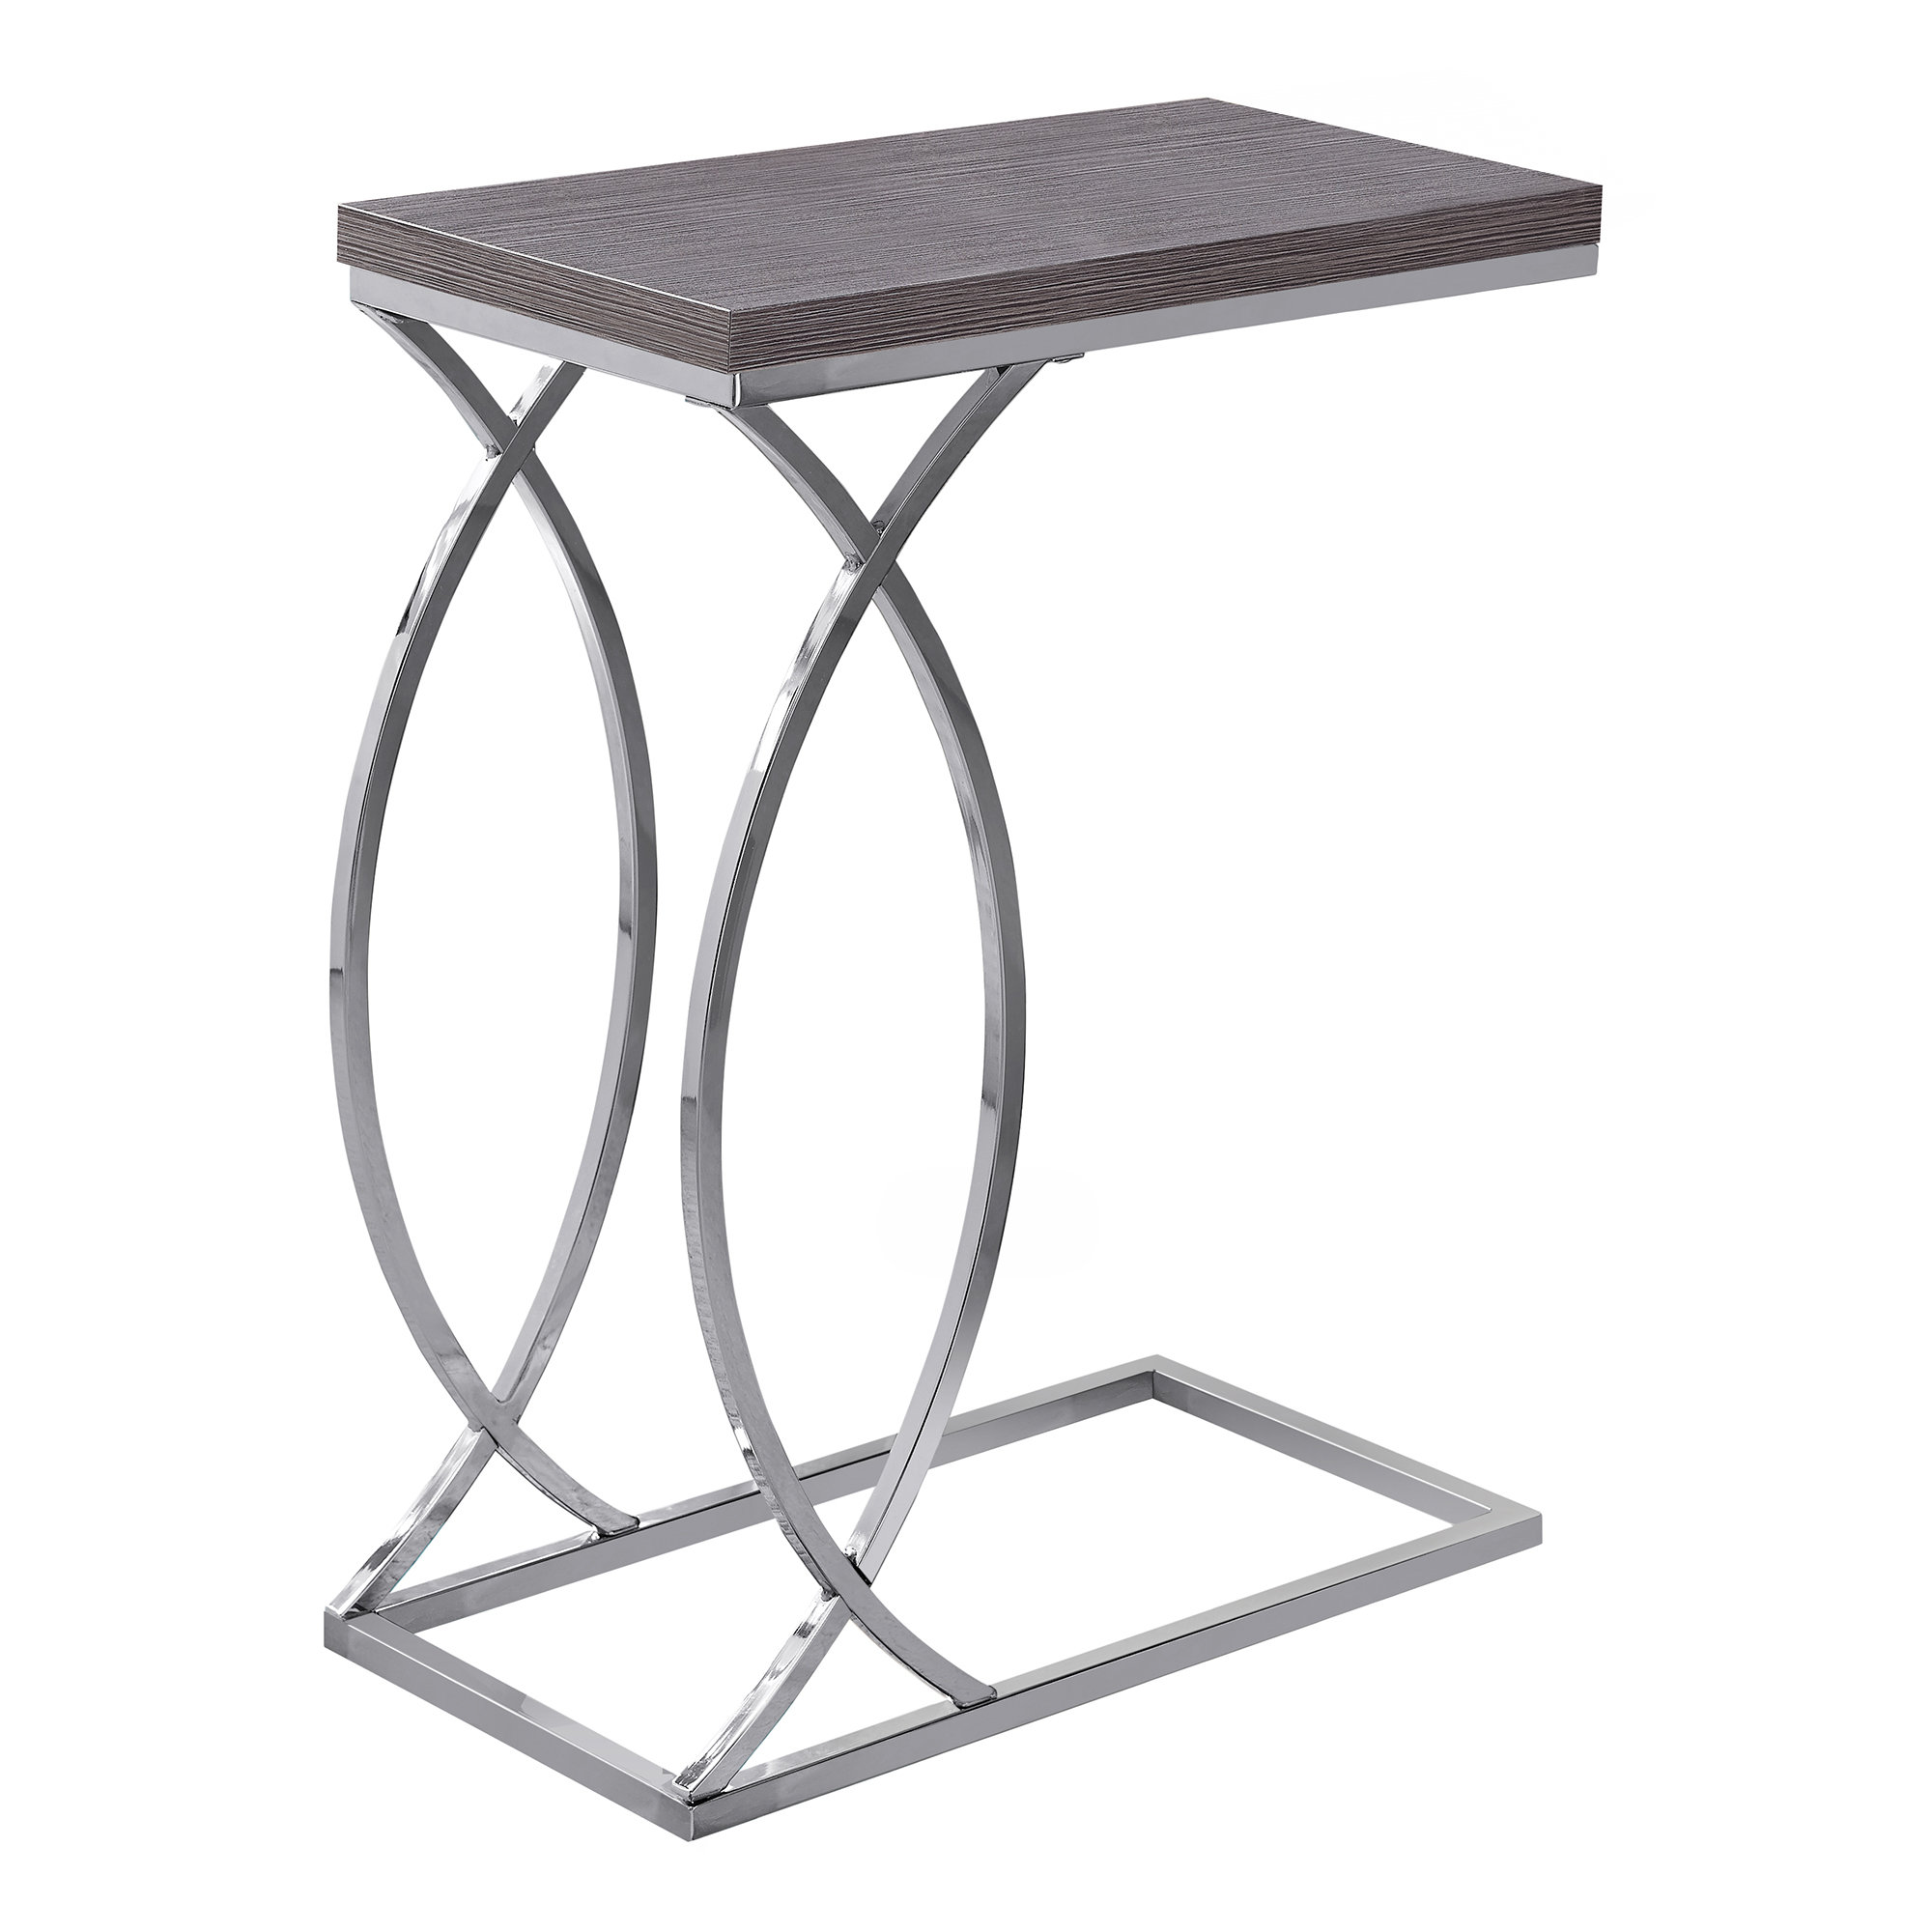 18.25" x 10.25" x 25" Grey Mdf Laminate Metal Accent Table